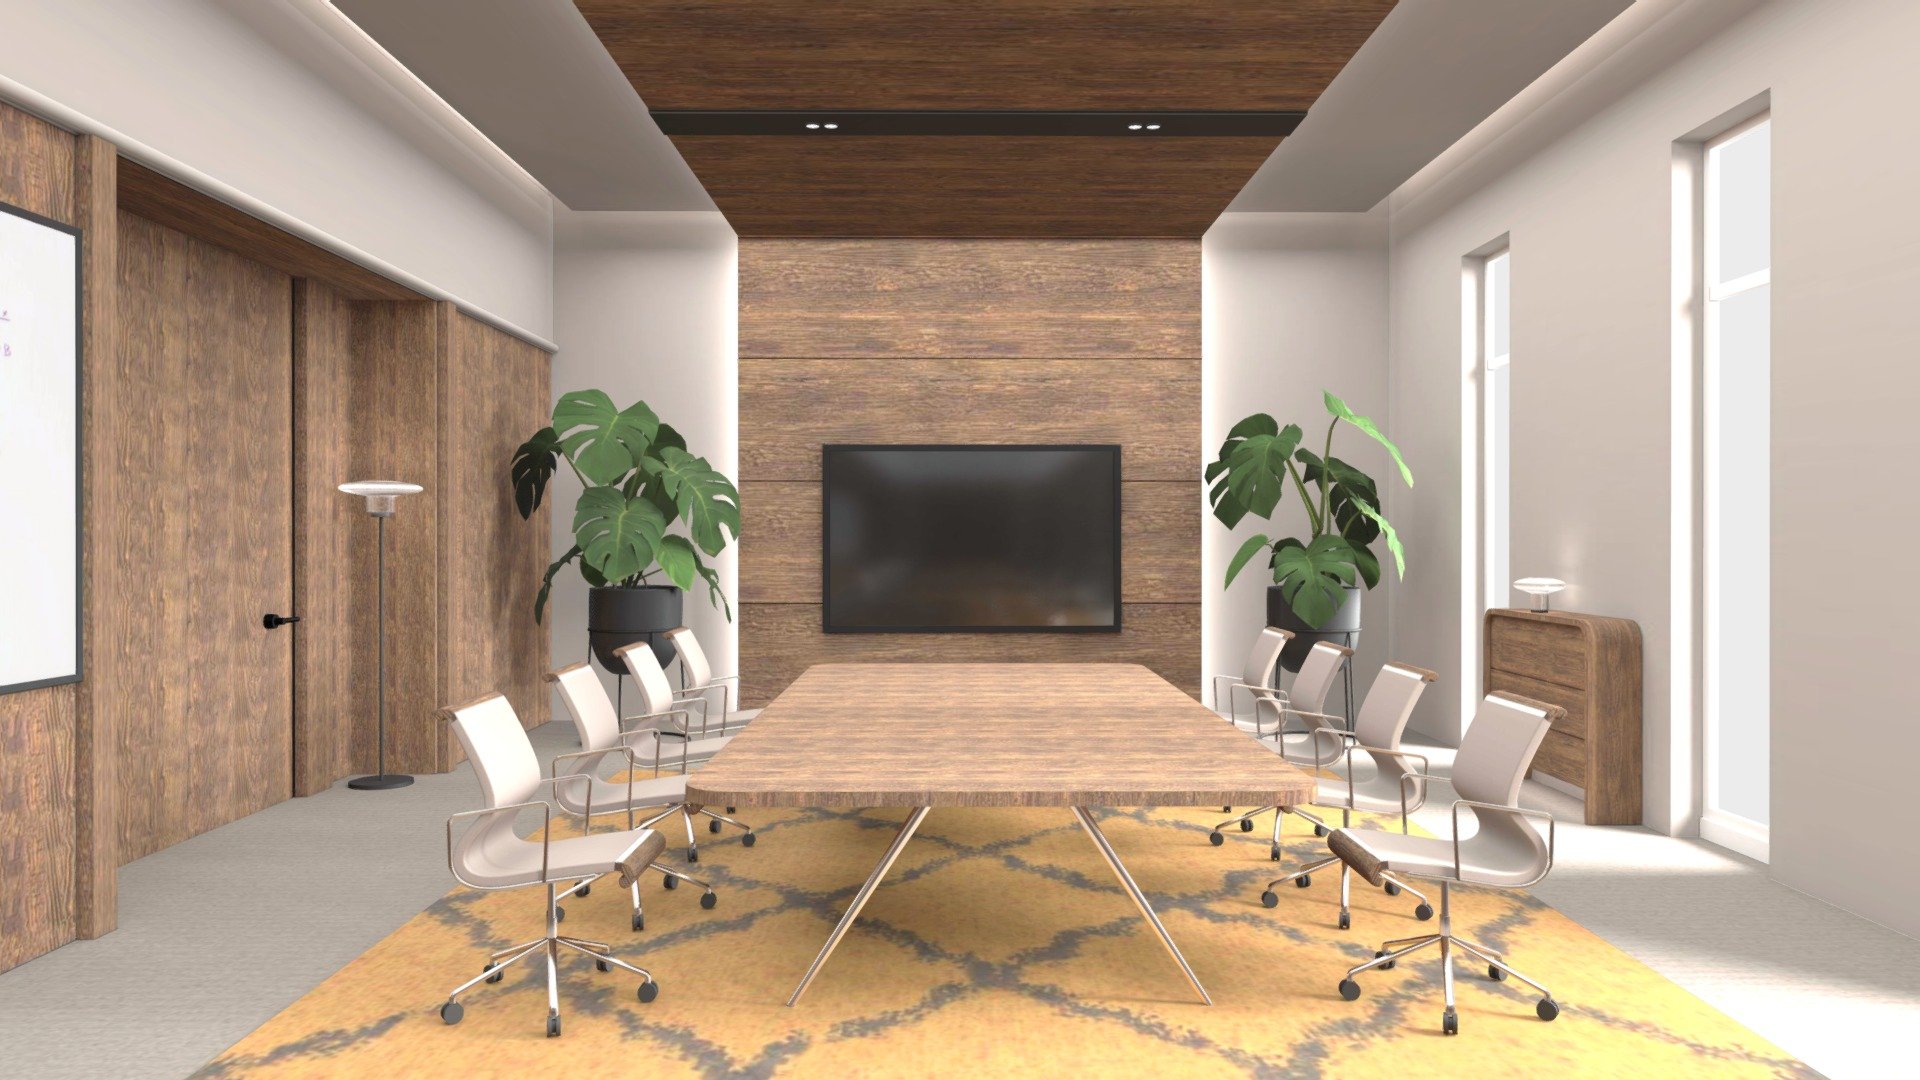 This is an executive office meeting room, designed in a rustic naturalism style.
It has a wall-mounted TV that can be used to cast multimedia content
There is also a whiteboard on the wall for brainstorming - office meeting room vr ready - Buy Royalty Free 3D model by QuarizonStudio 3d model